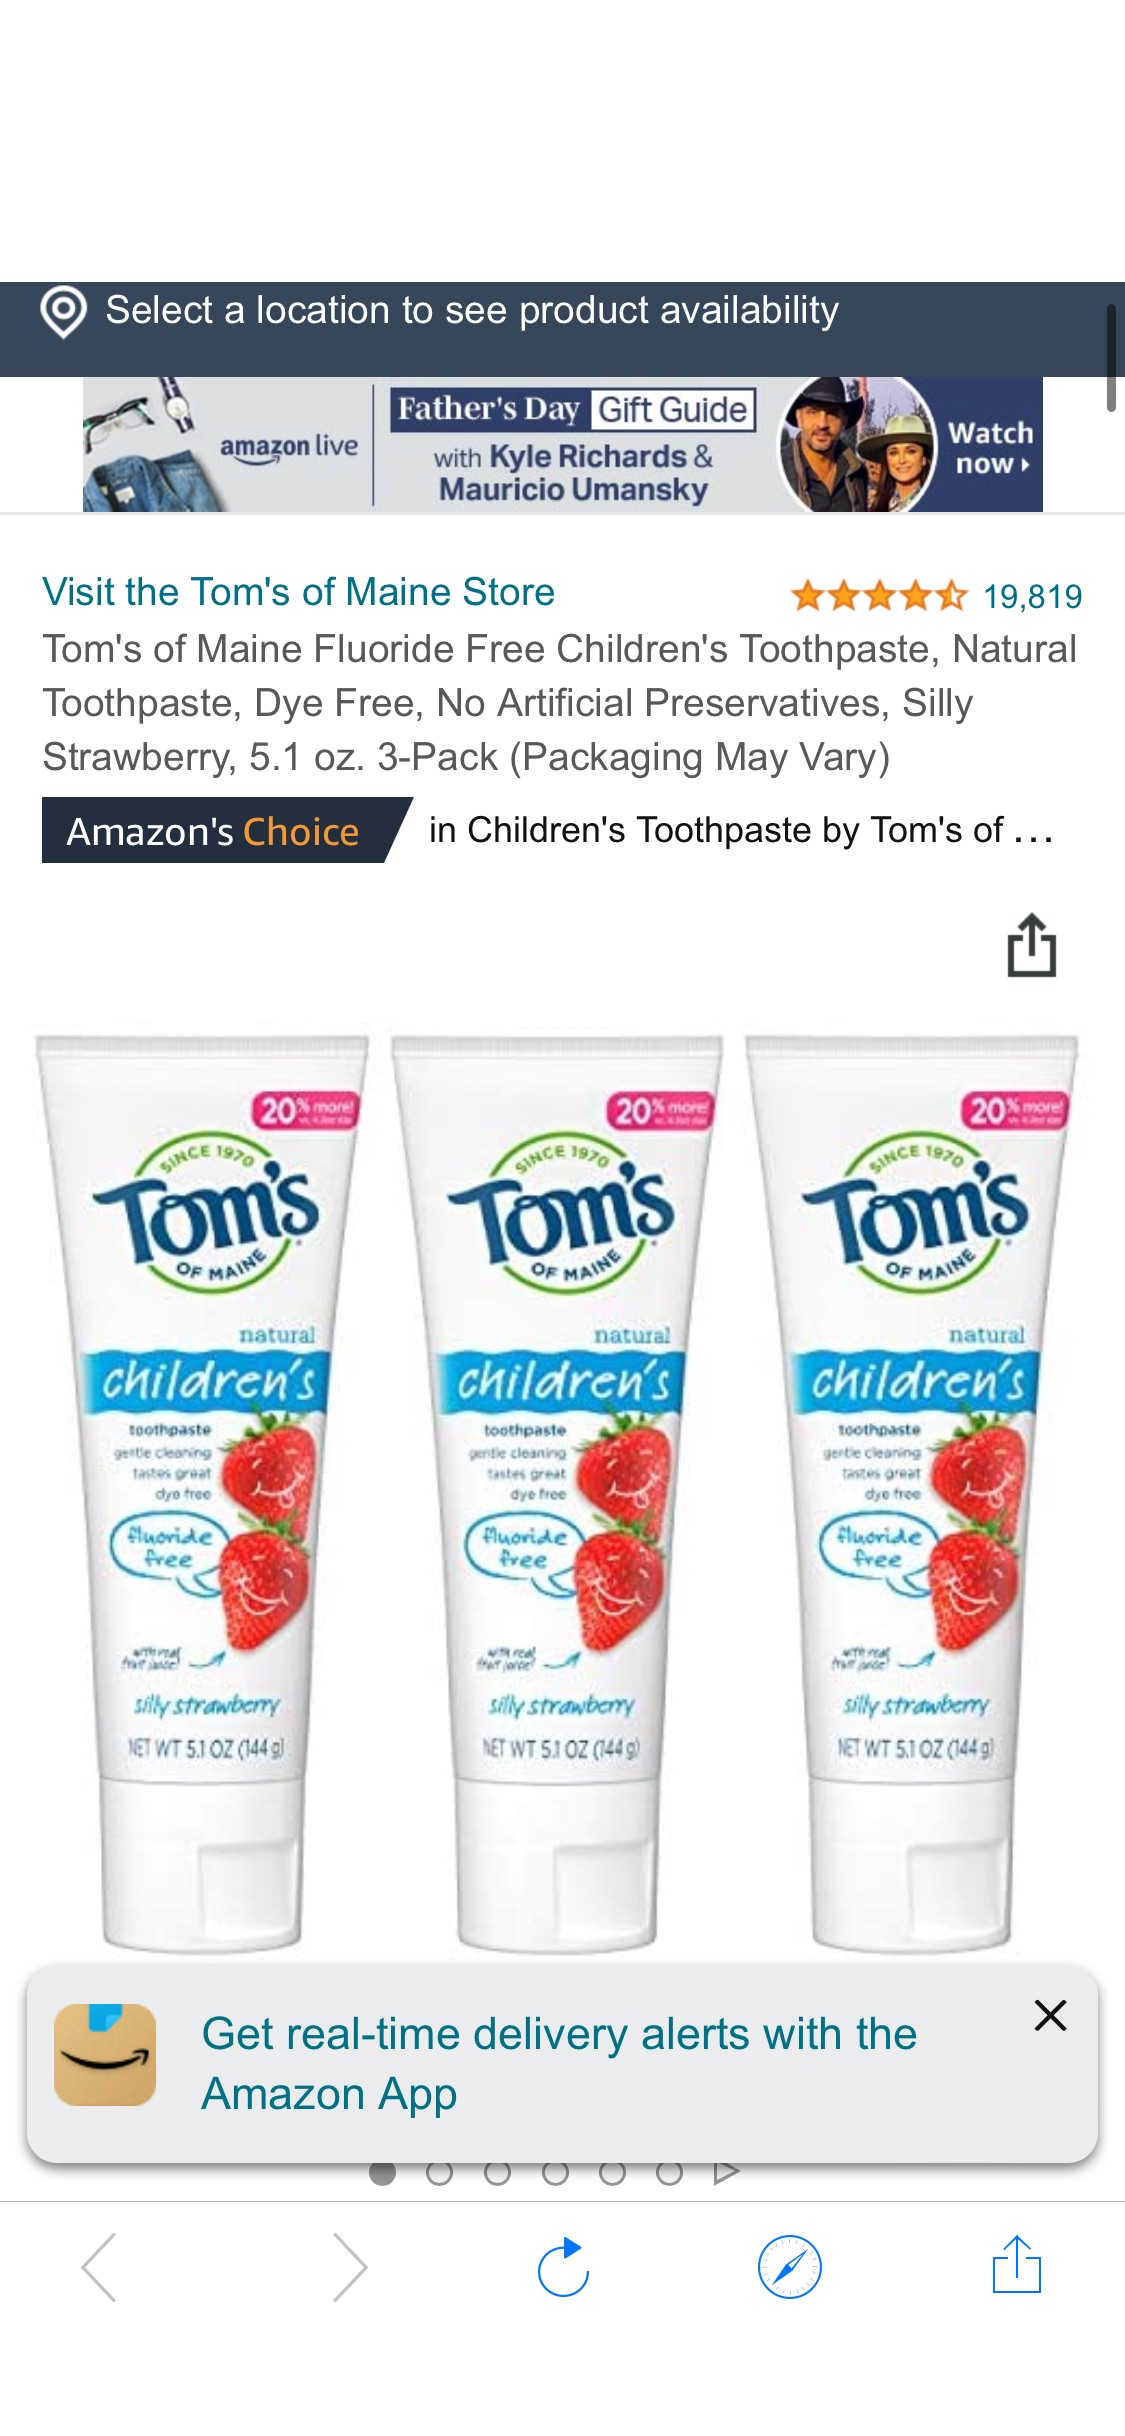 Amazon.com : Tom's of Maine Fluoride Free Children's Toothpaste, Natural Toothpaste, Dye Free, No Artificial Preservatives, Silly Strawberry, 5.1 oz. 3-Pack (Packaging May Vary) : Health & Household